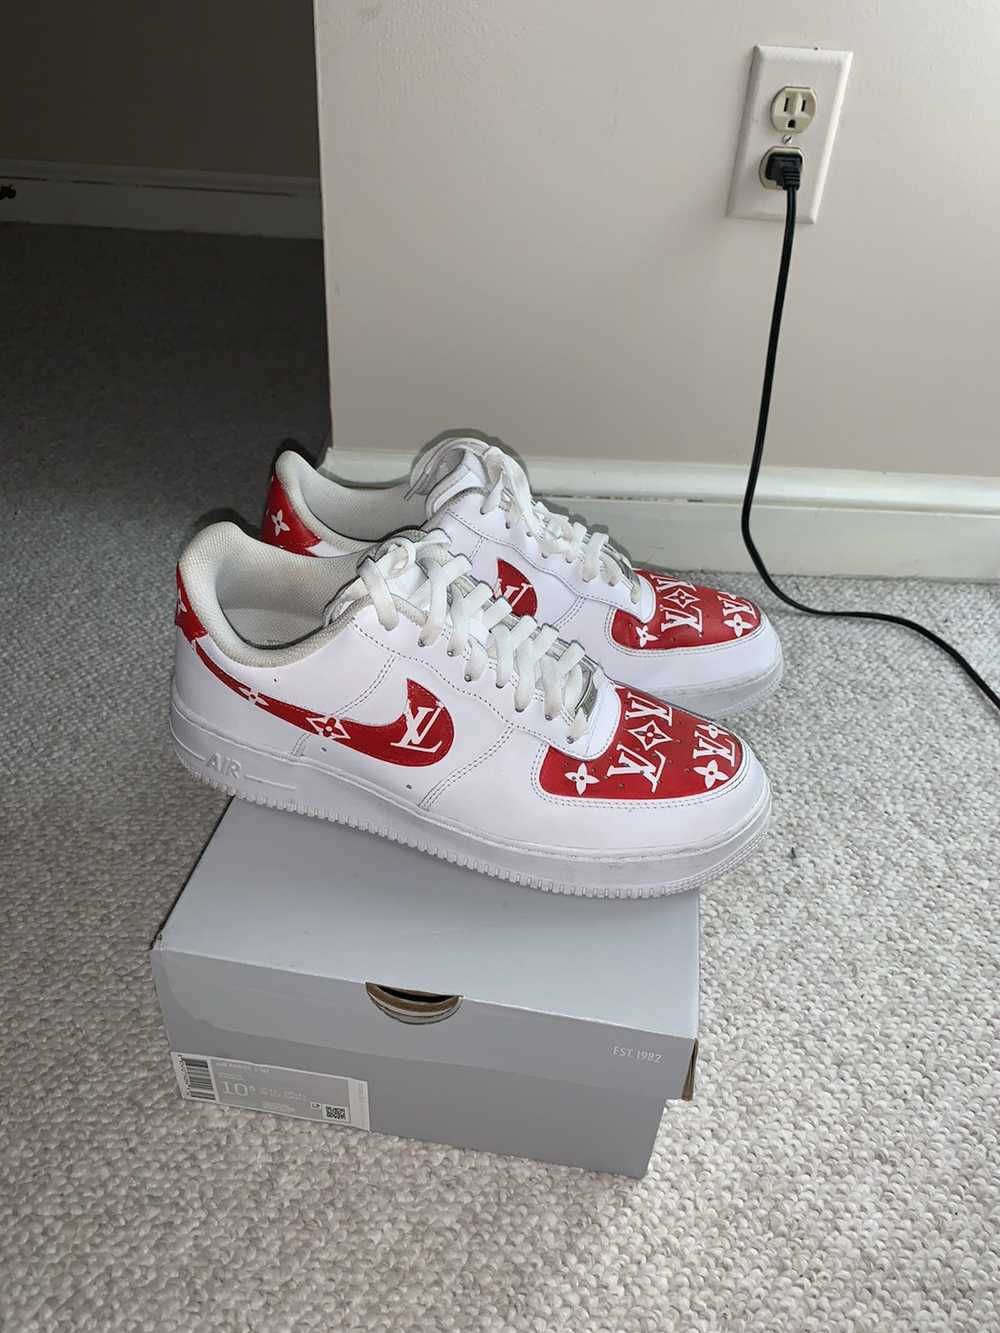 Nike Air Force 1 LV Customized - image 2